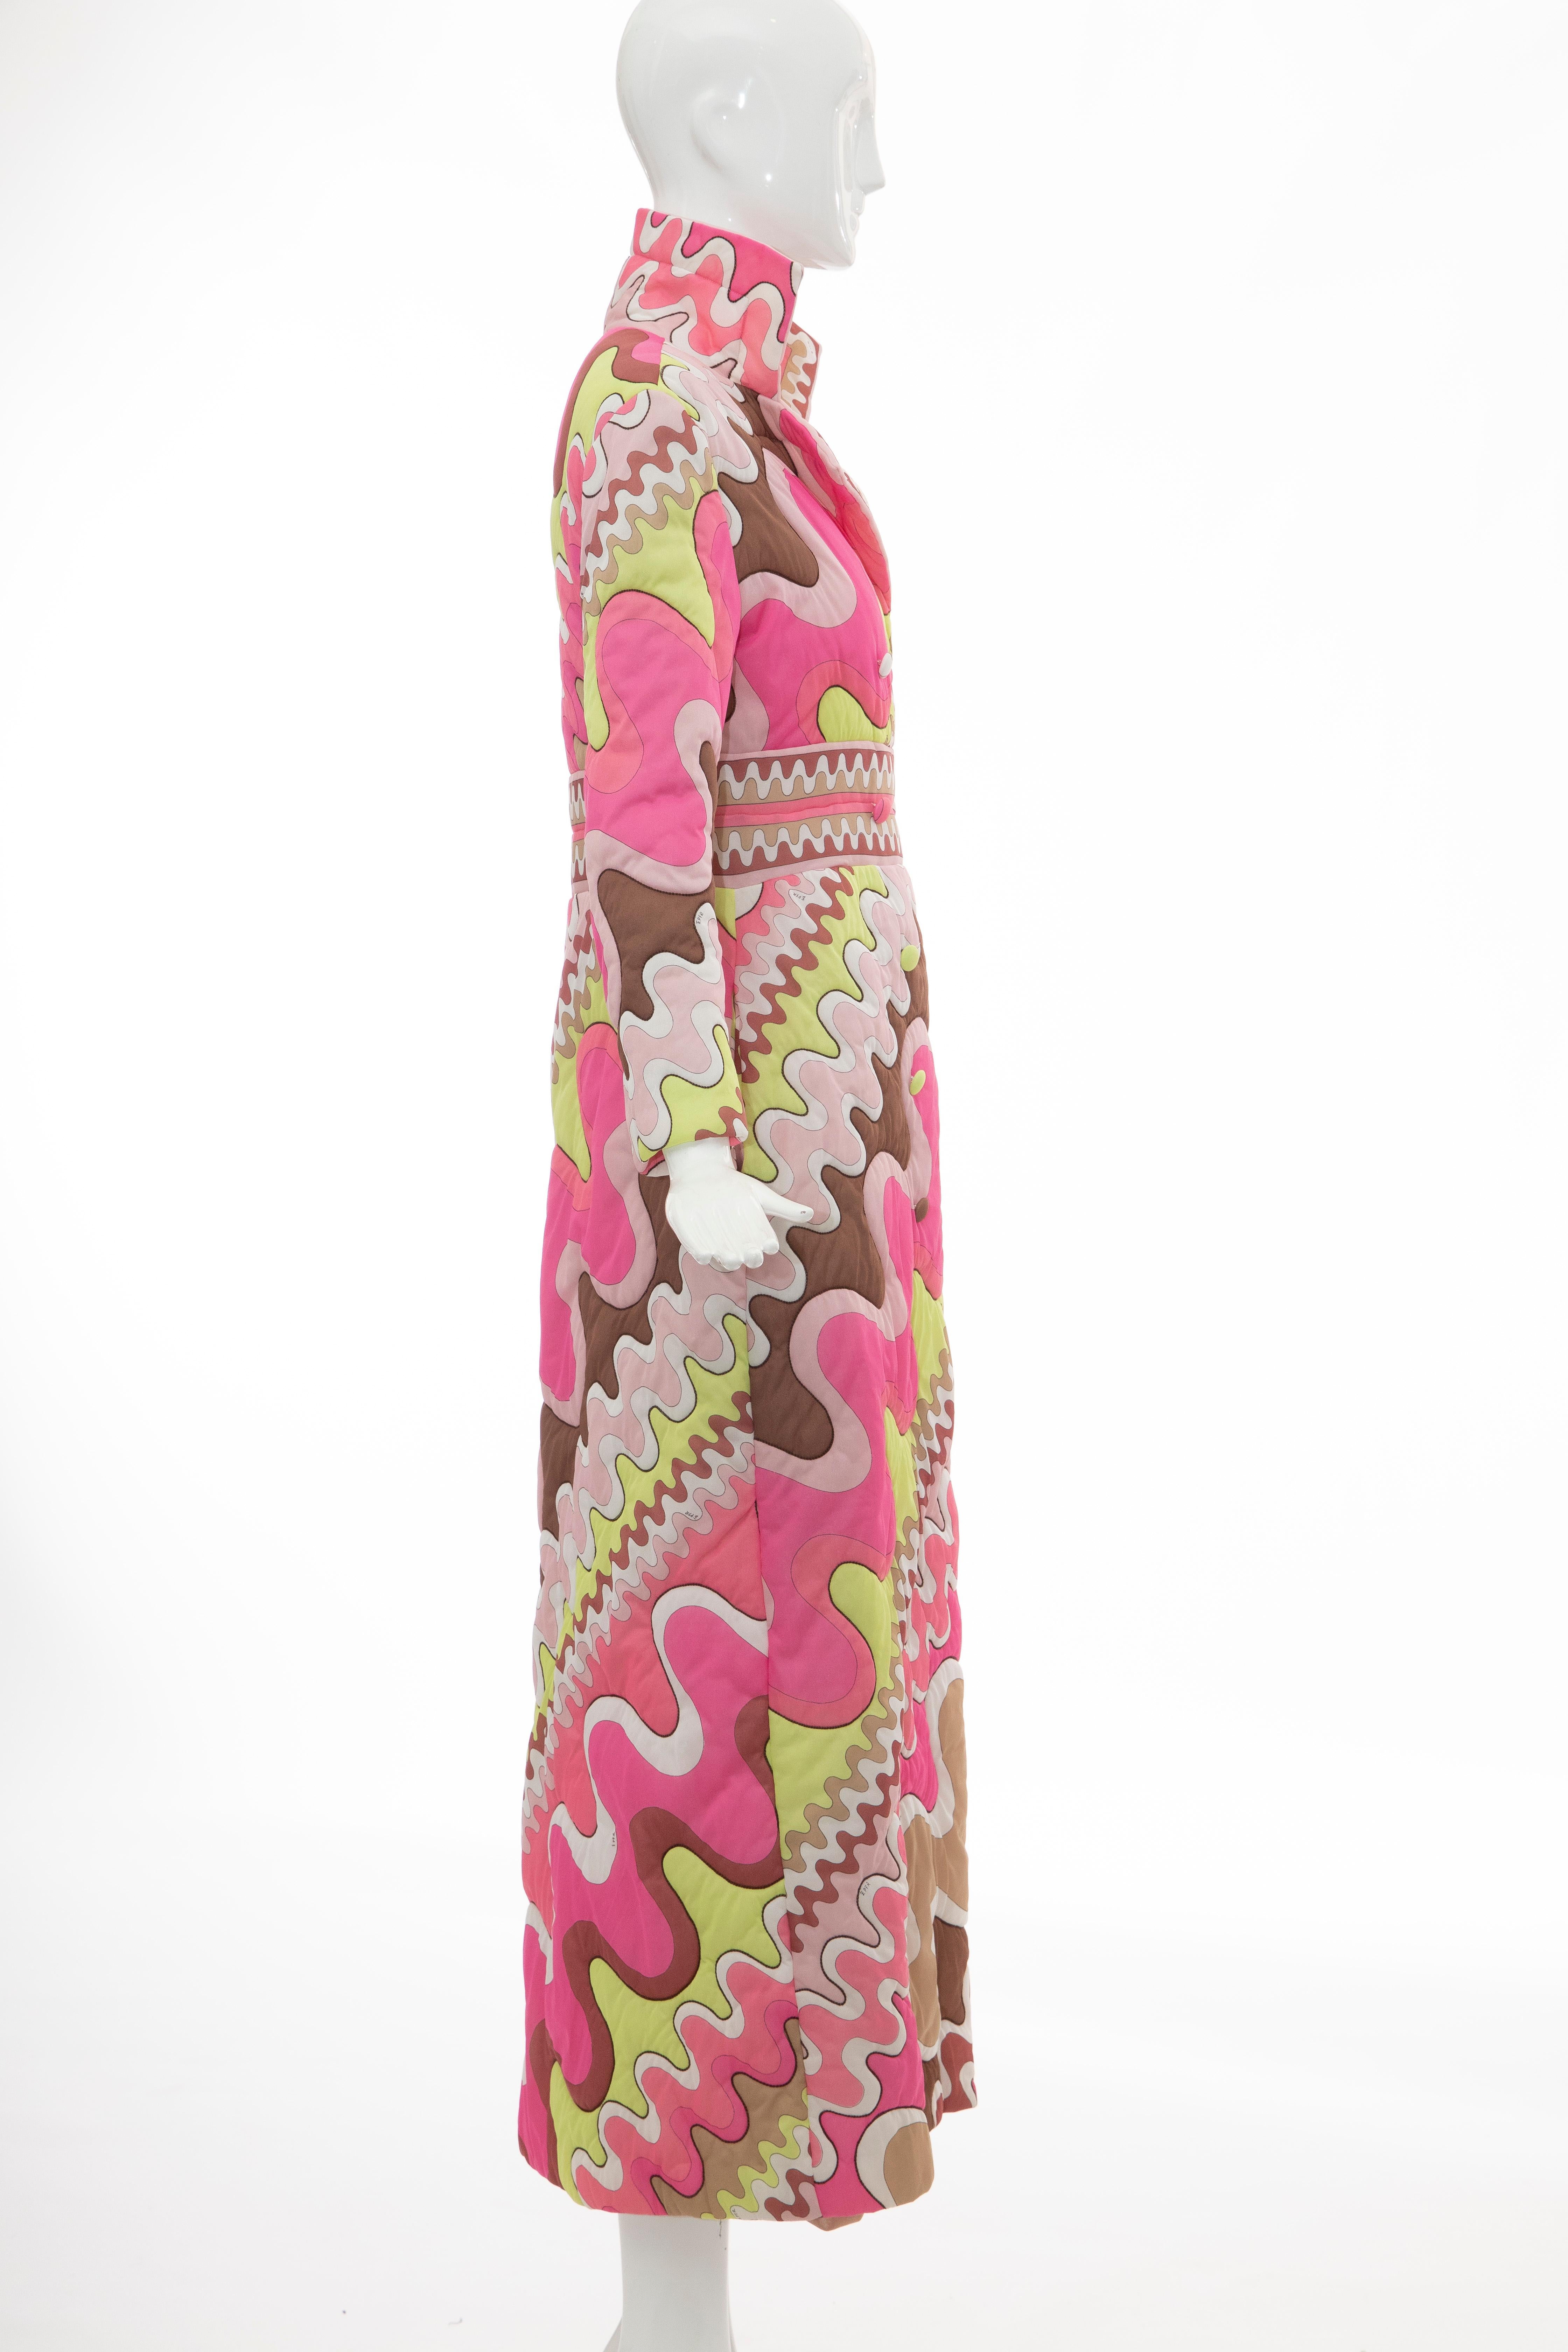 Women's Emilio Pucci Double-Breasted Abstract Print Quilted Coat, Circa: 1970's